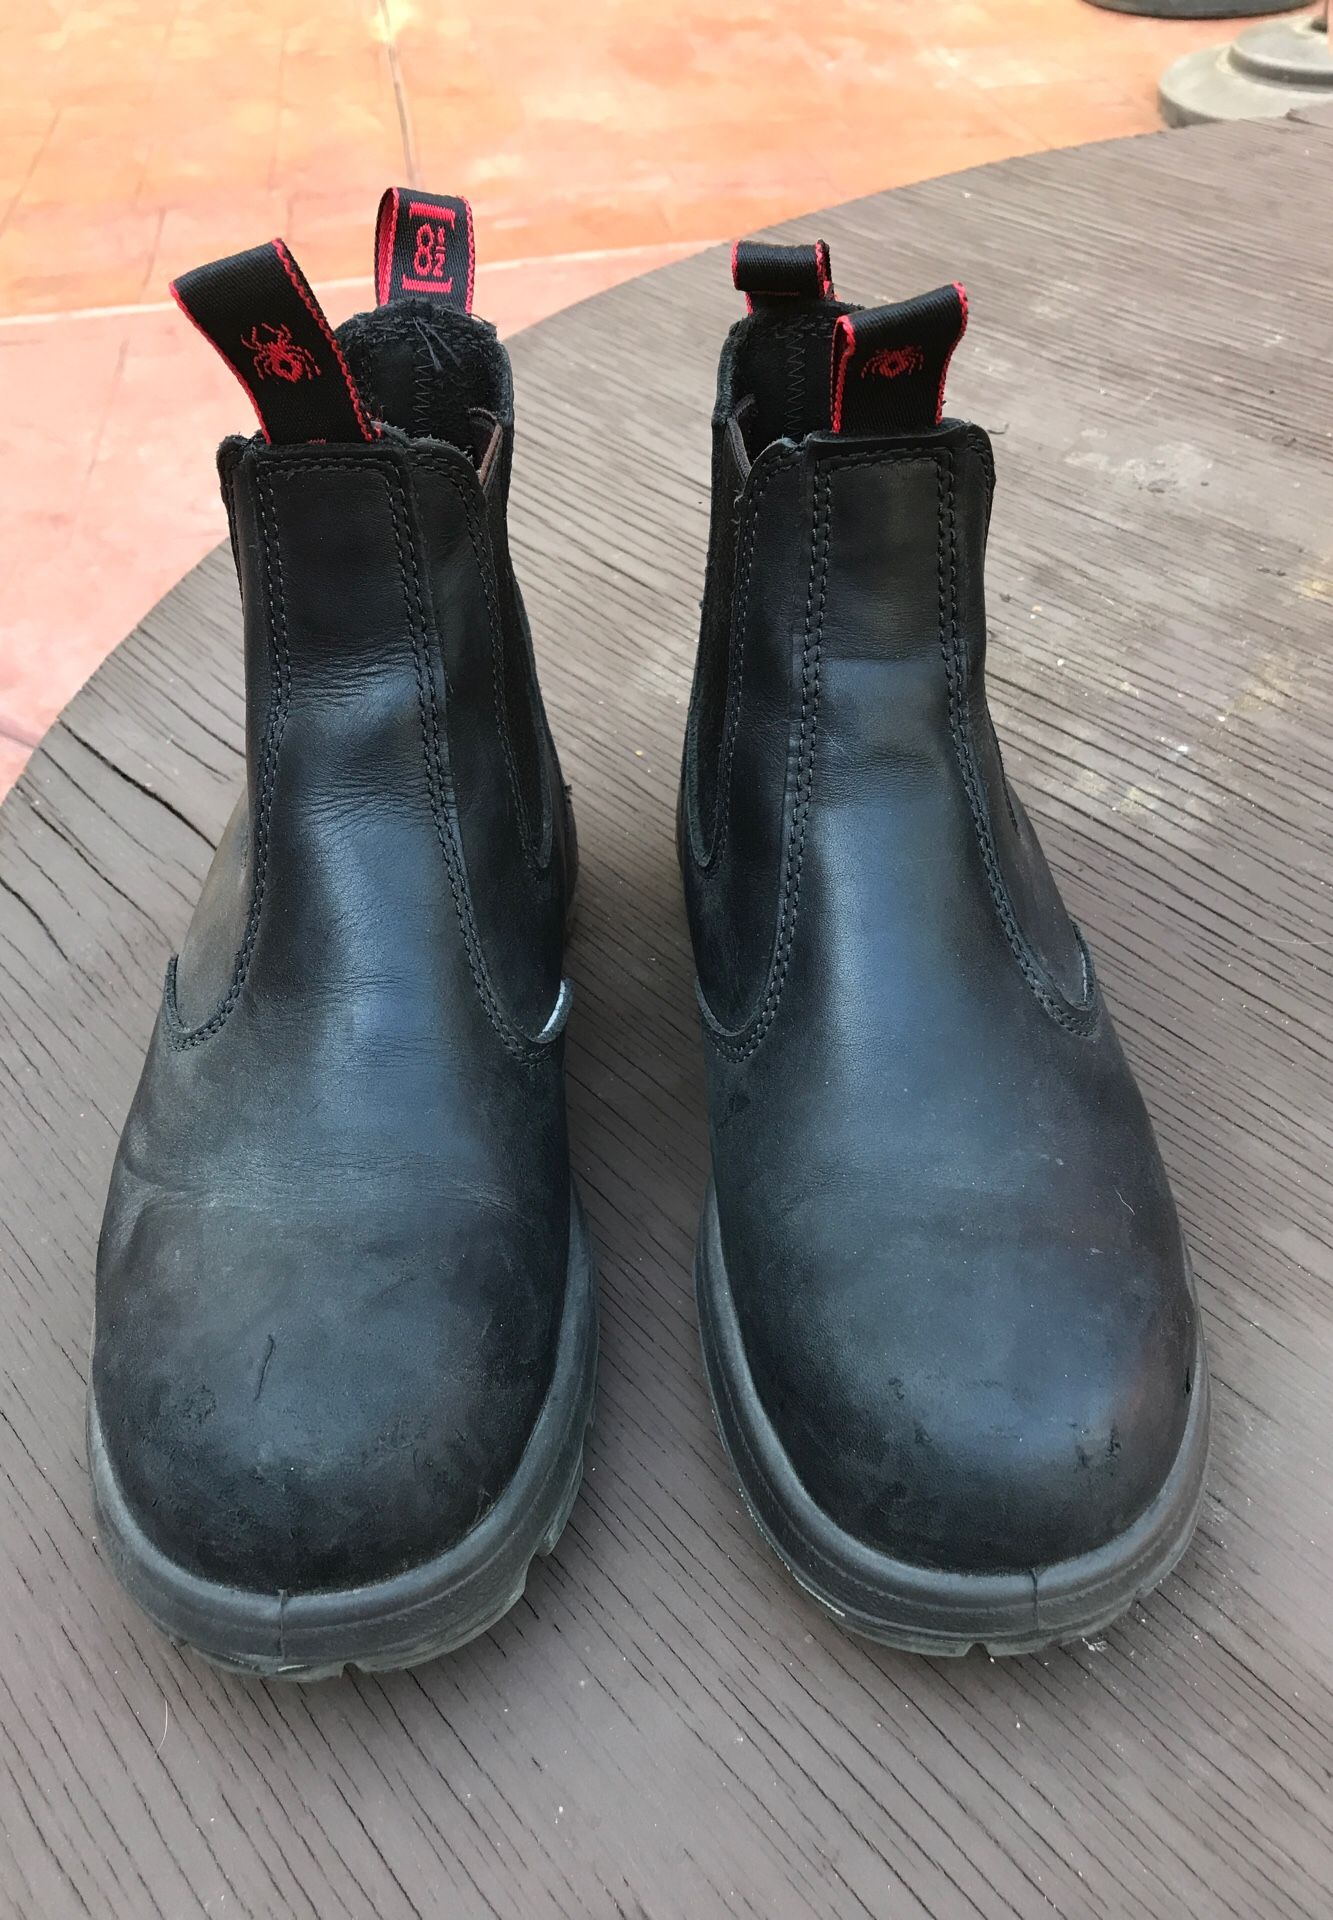 Red back work boots